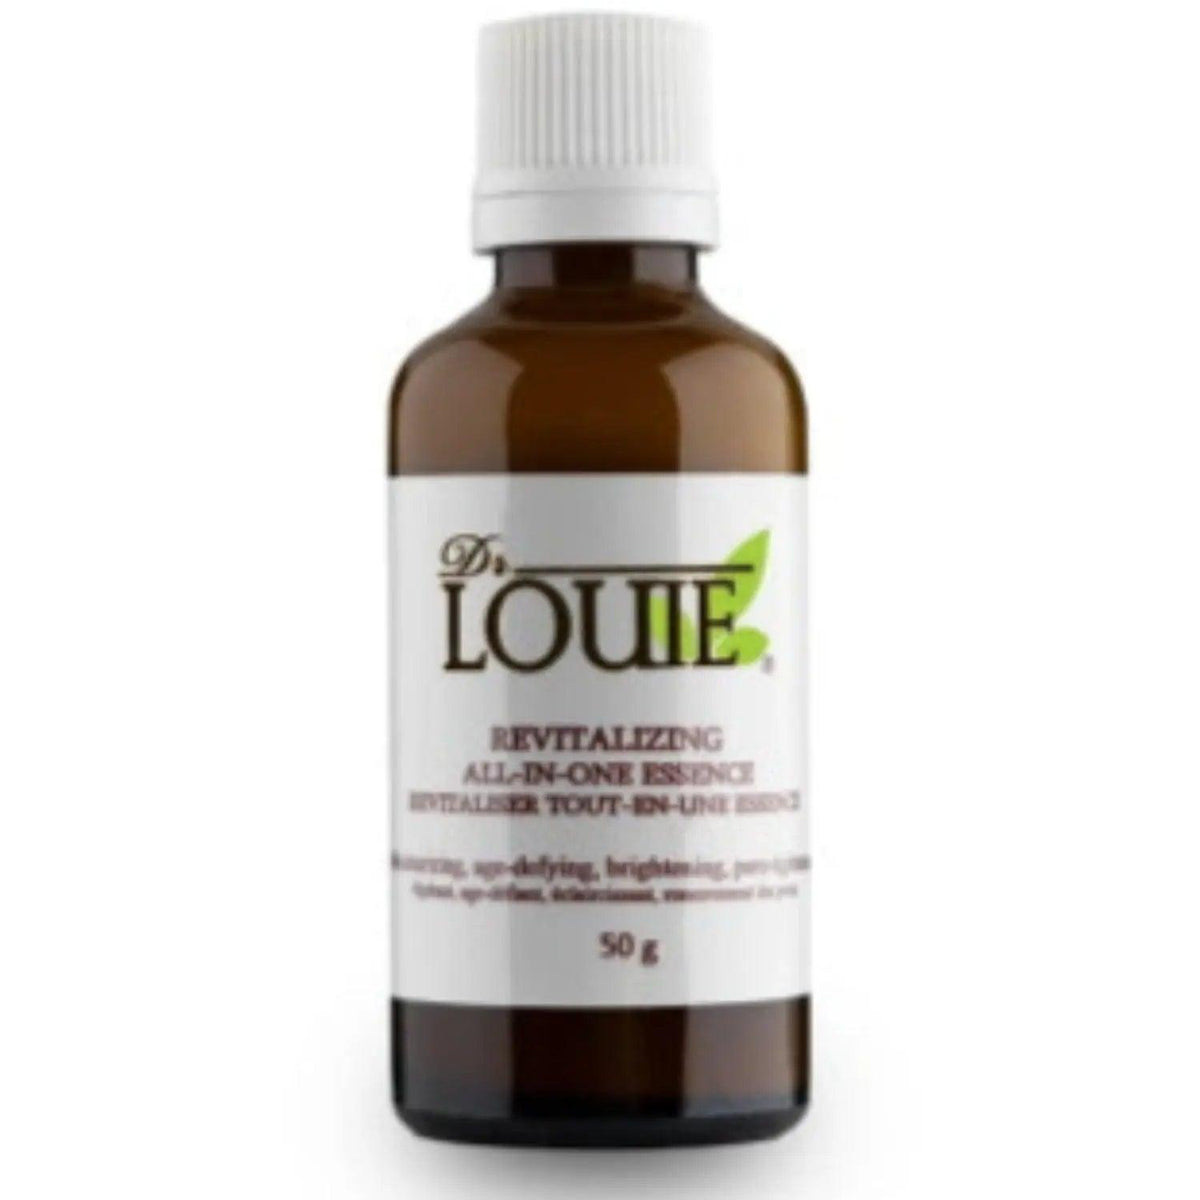 Dr. Louie Revitalizing All-in-One Essence 50g Face Serum at Village Vitamin Store